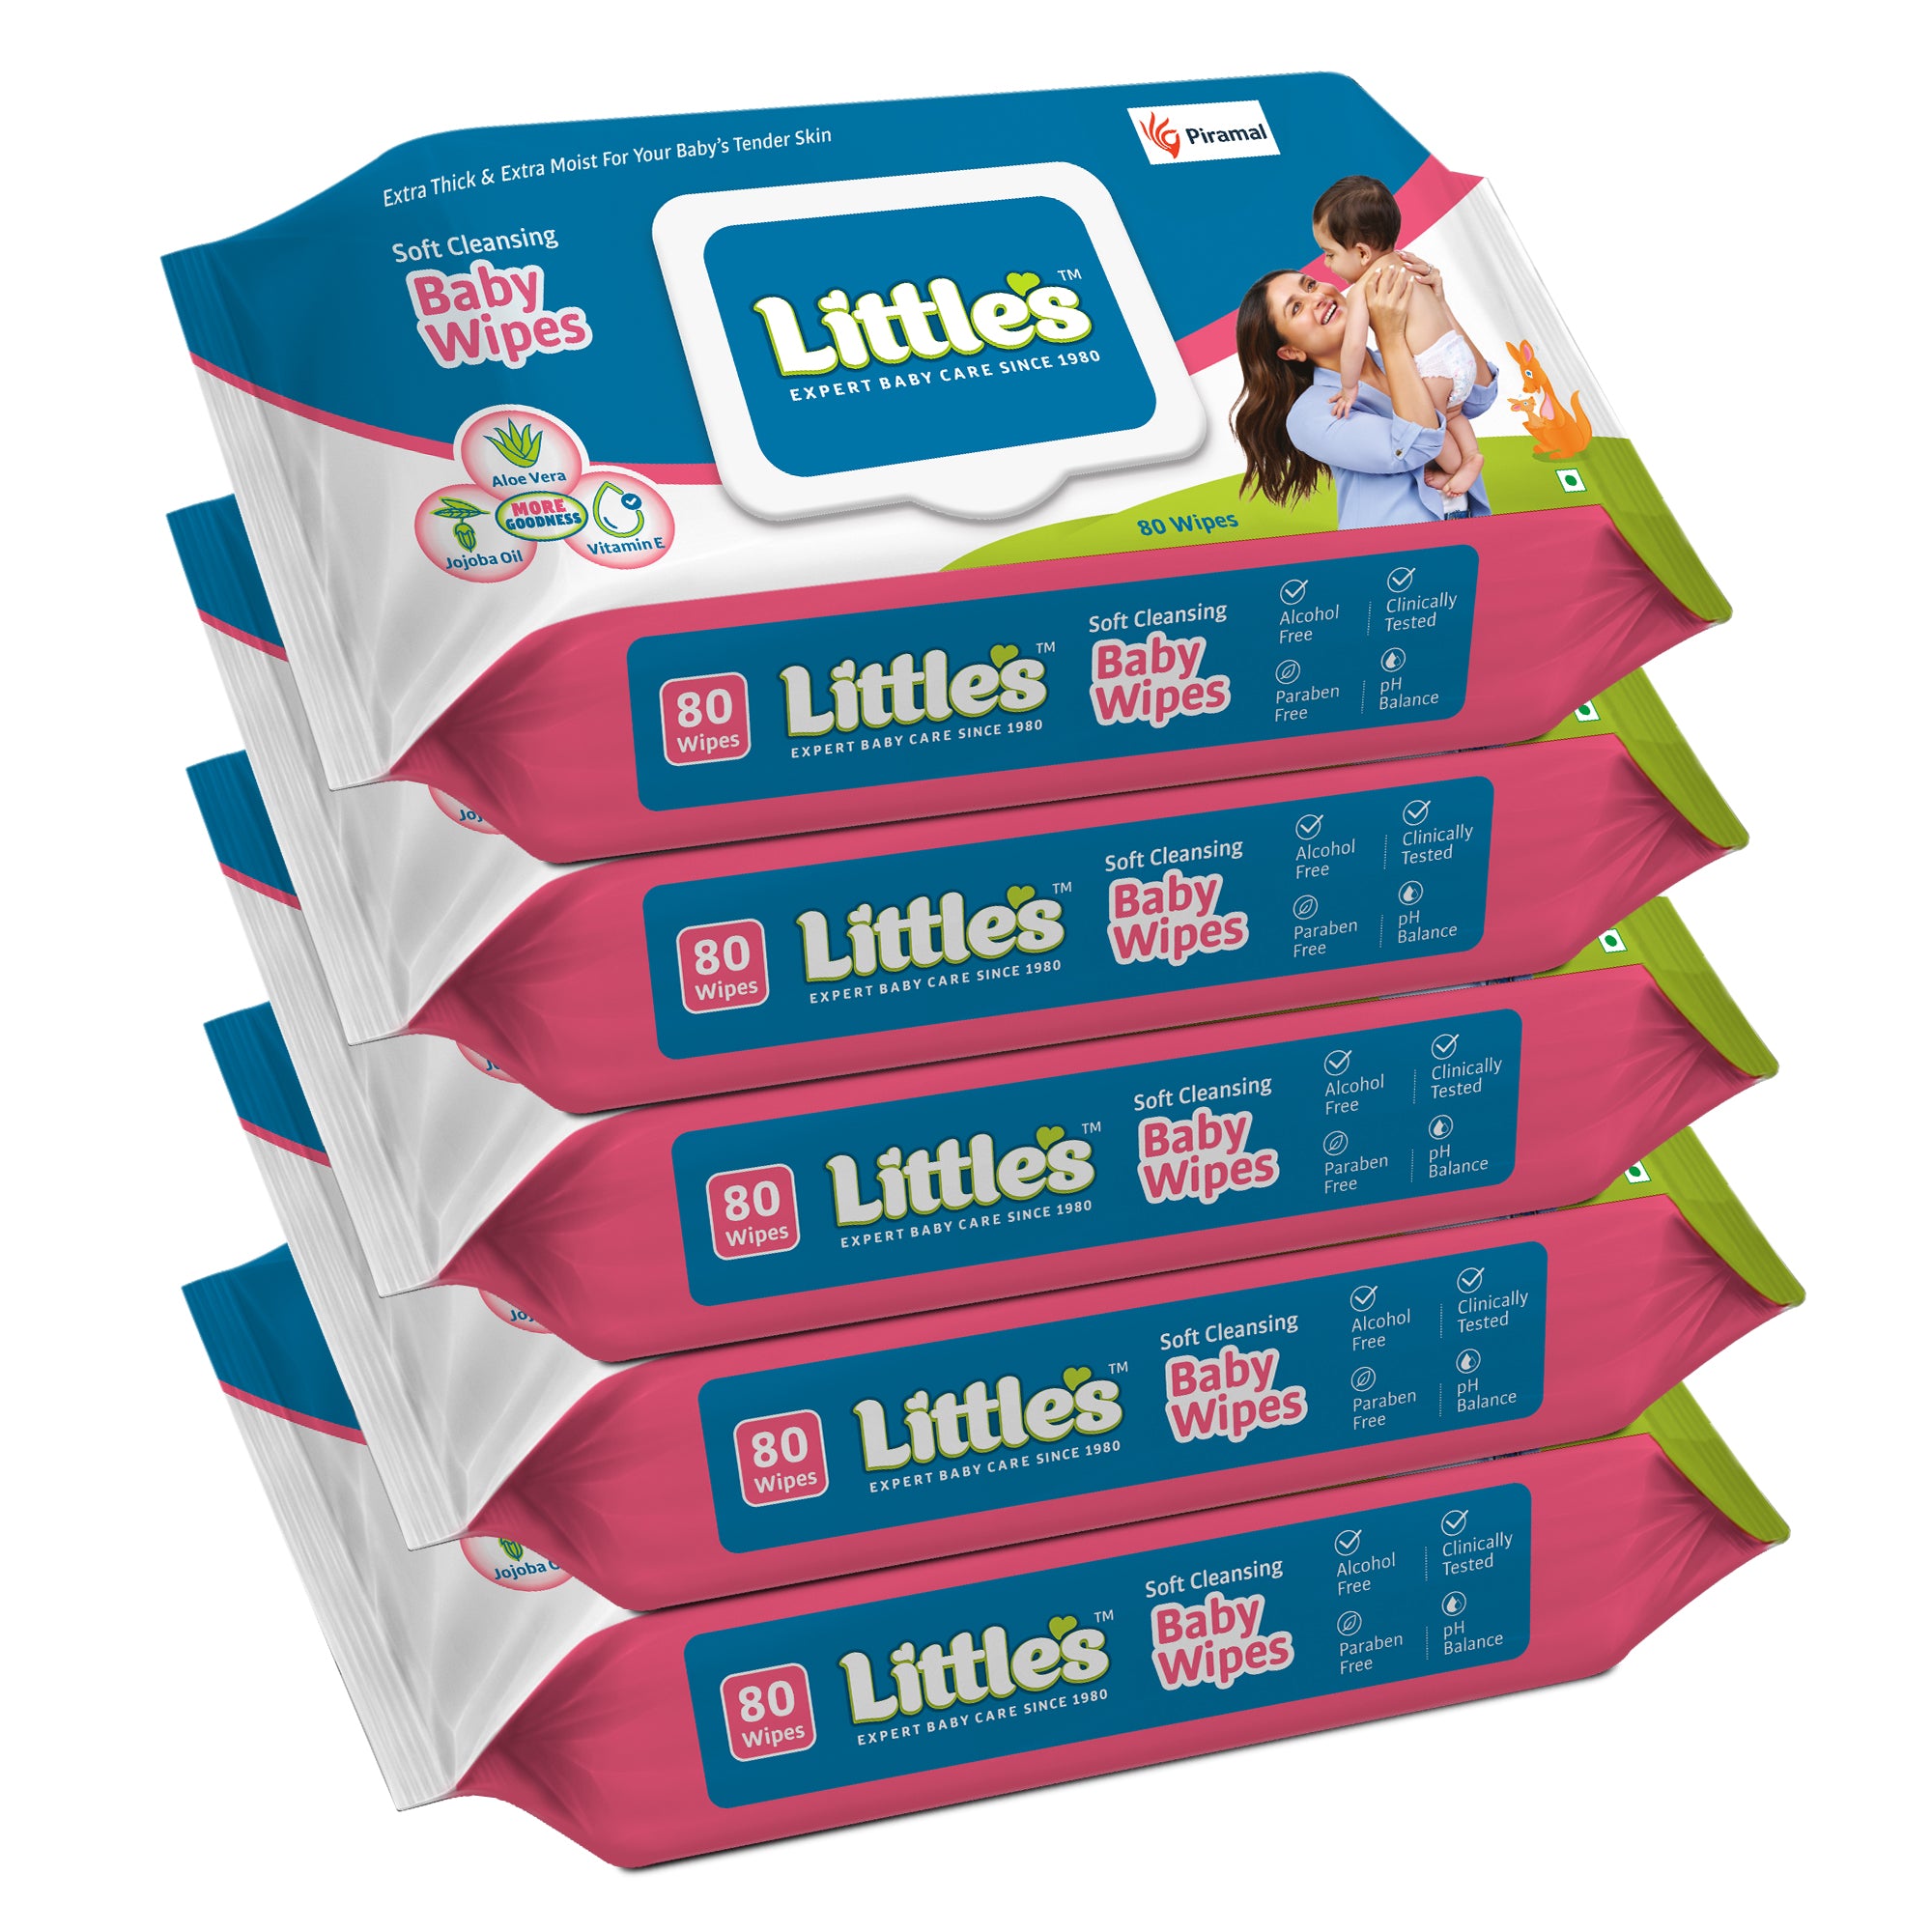 Little's Soft Cleansing Baby Wipes Lid Pack | Contains Aloe Vera & Jojoba Oil -80 Wipes